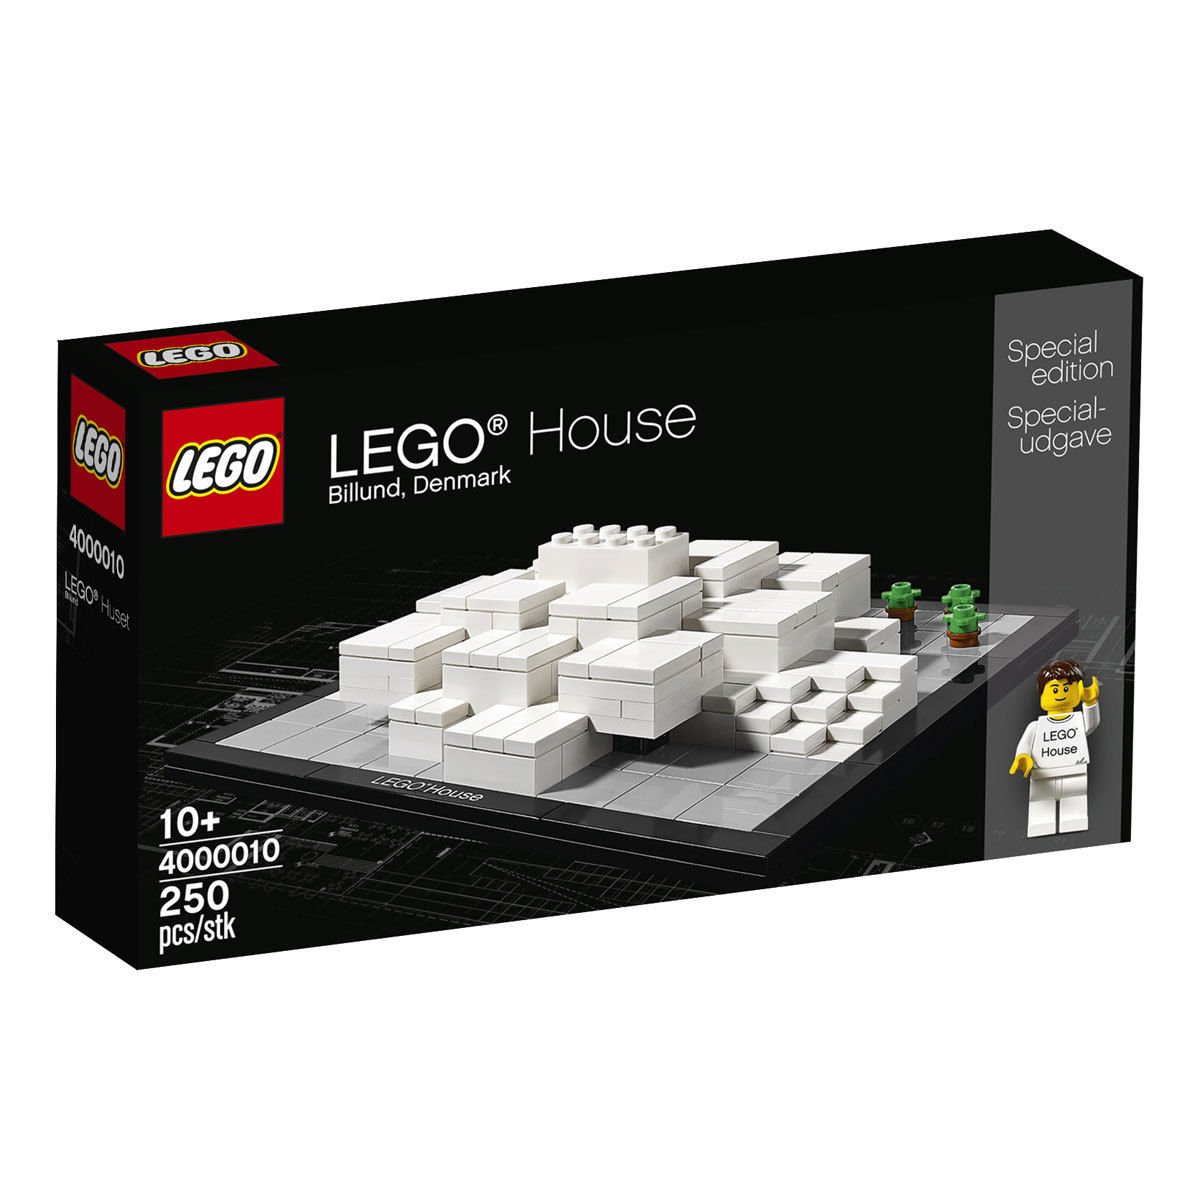 Lego House Special Edition Incl Minifigure